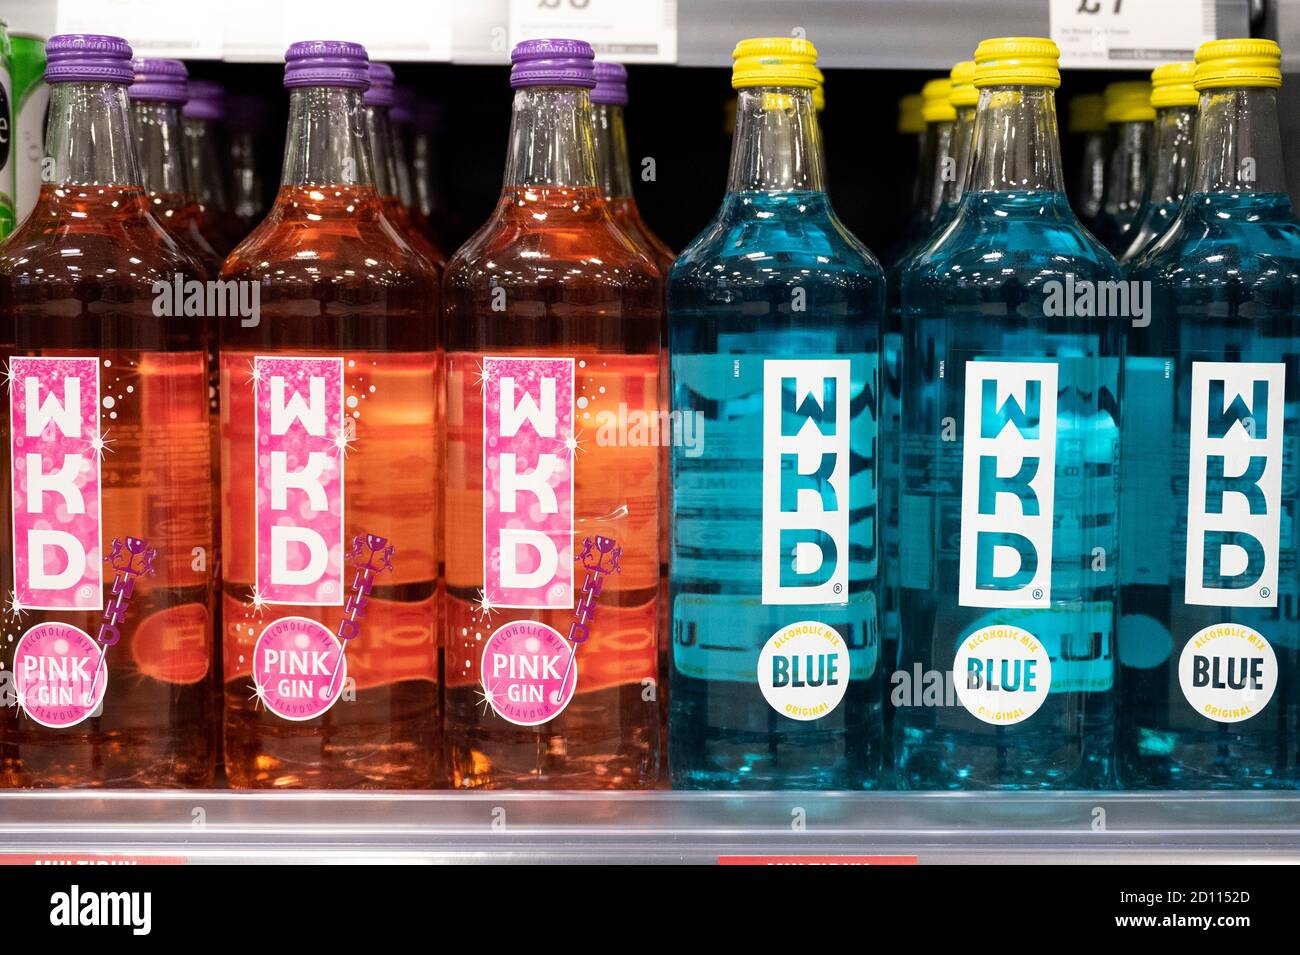 Bottles of red and blue WKD alcohol on sale in a supermarket in Cardiff, Wales, United Kingdom. Stock Photo